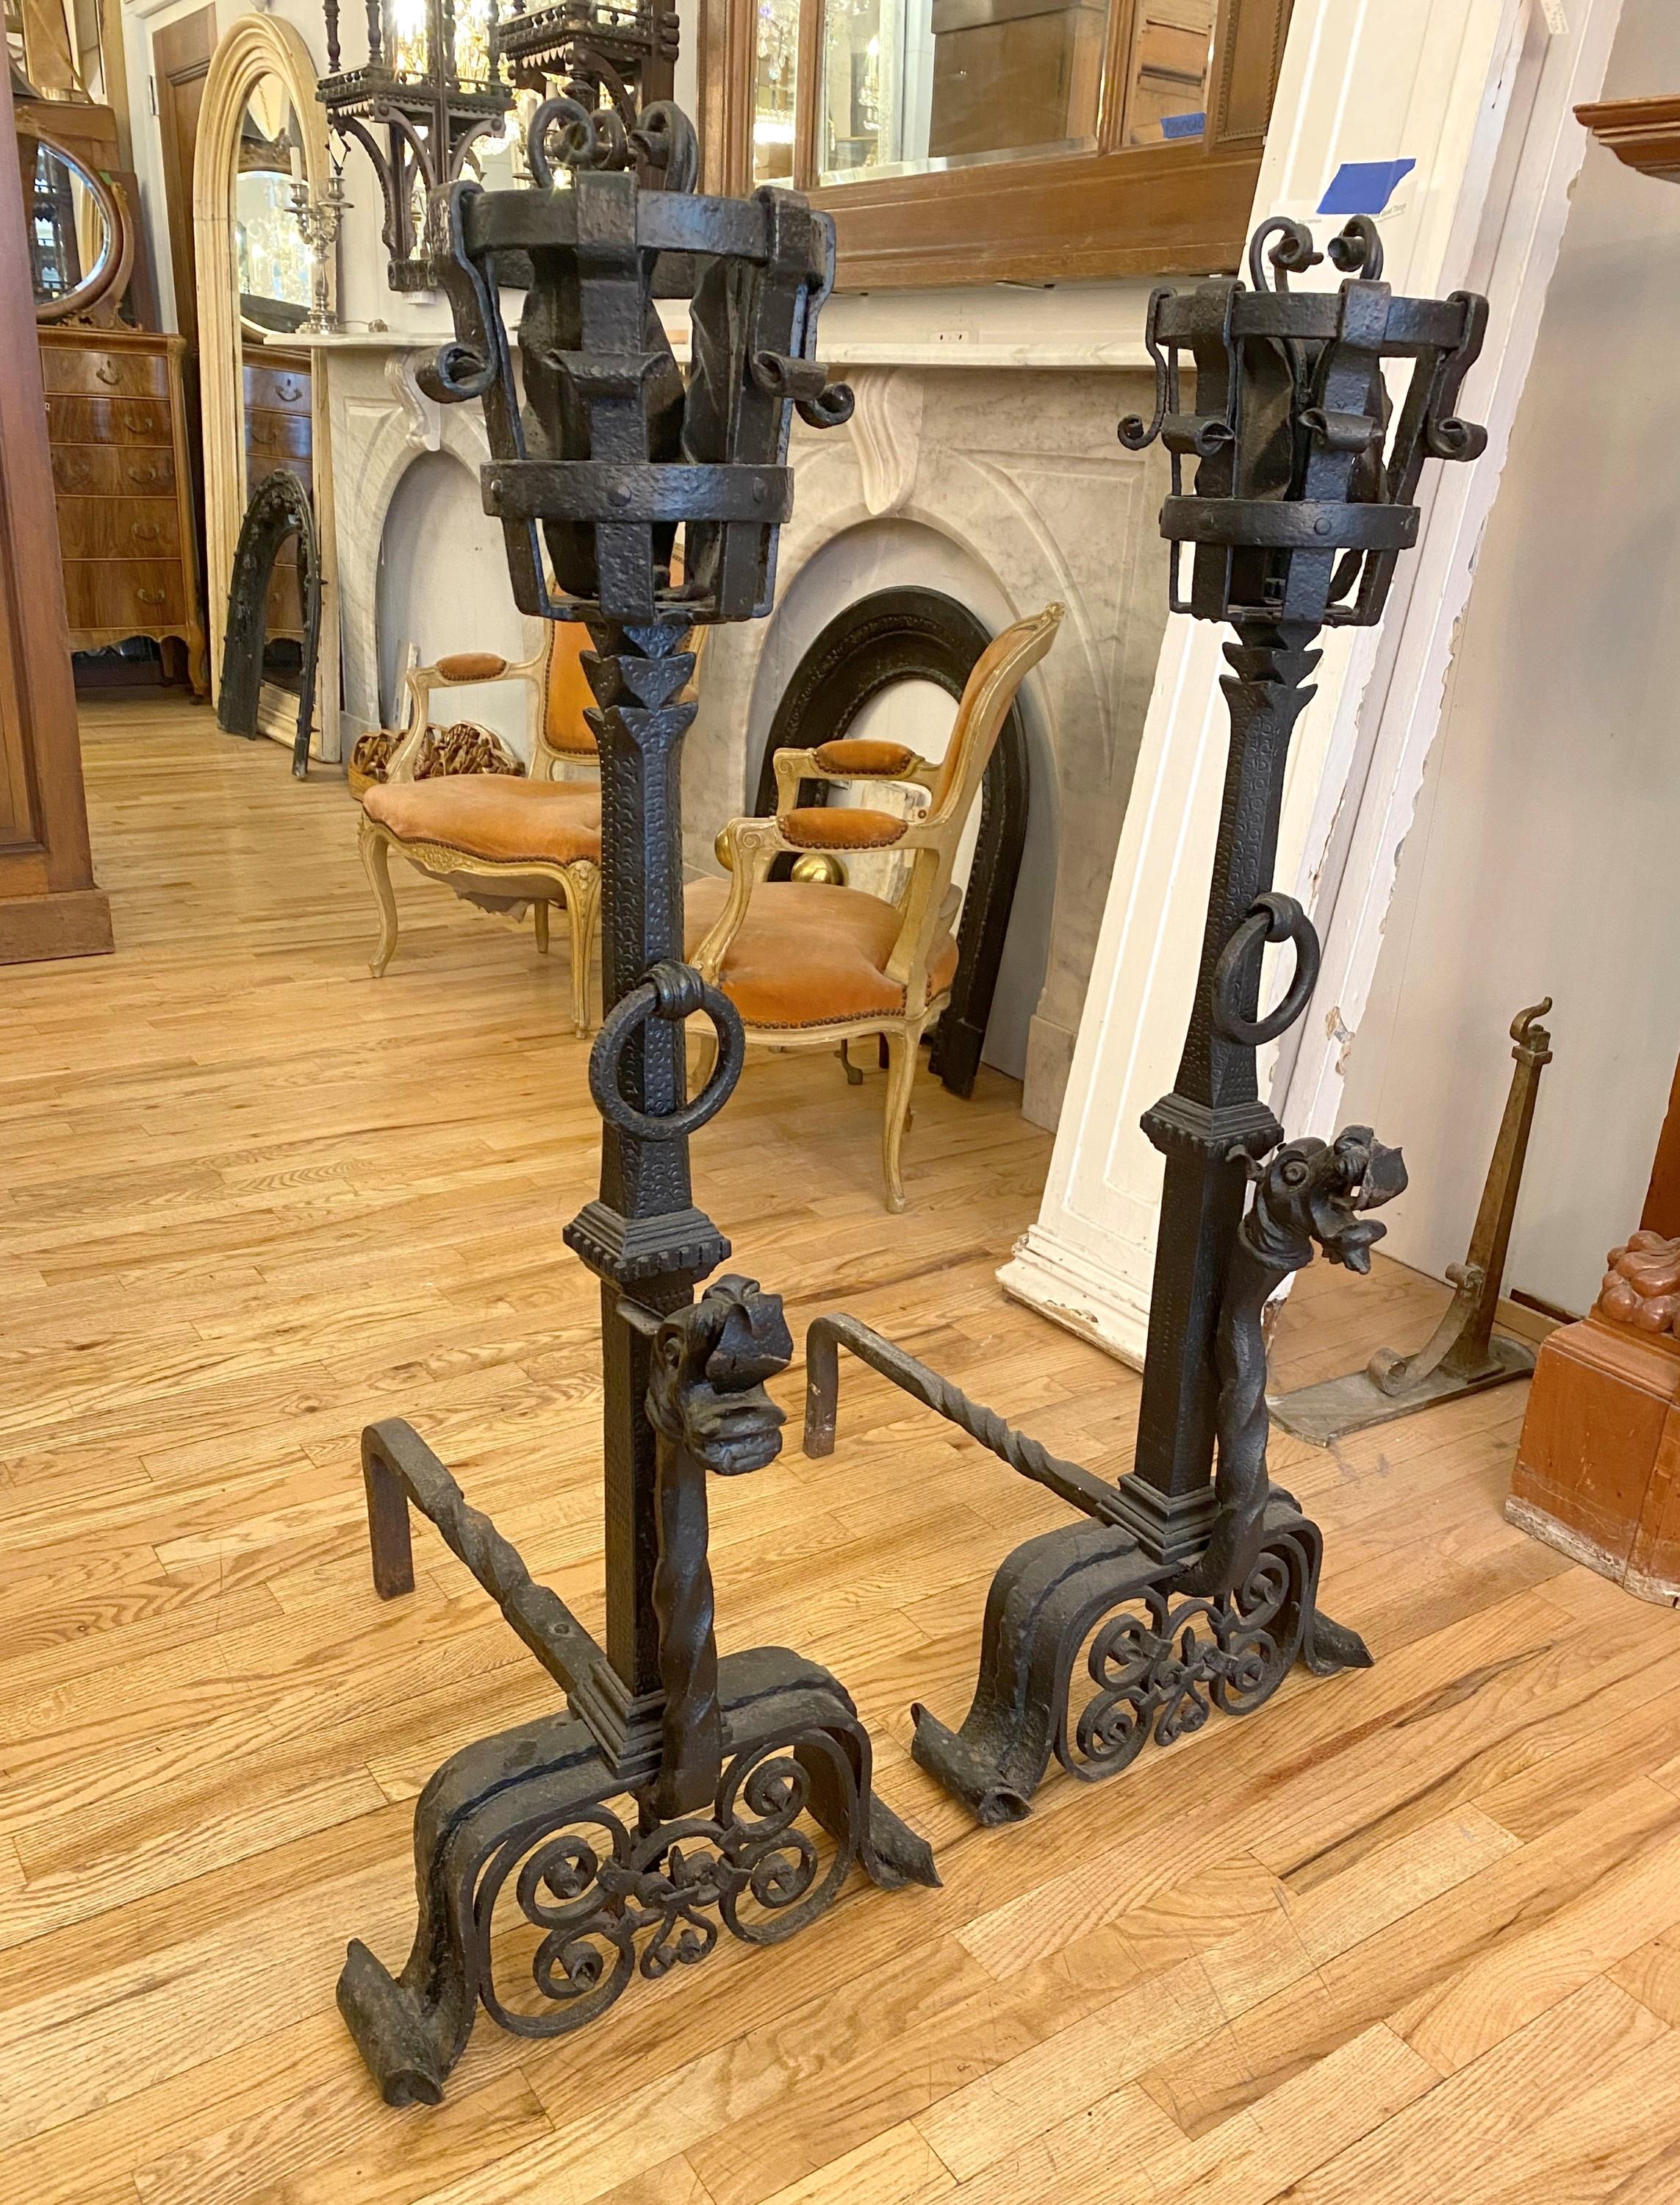 Very large ornately designed hand wrought andirons with griffin heads from the 19th century,  finished in black. They are in great condition. Priced as a pair. Please note, this item is located in one of our NYC locations.